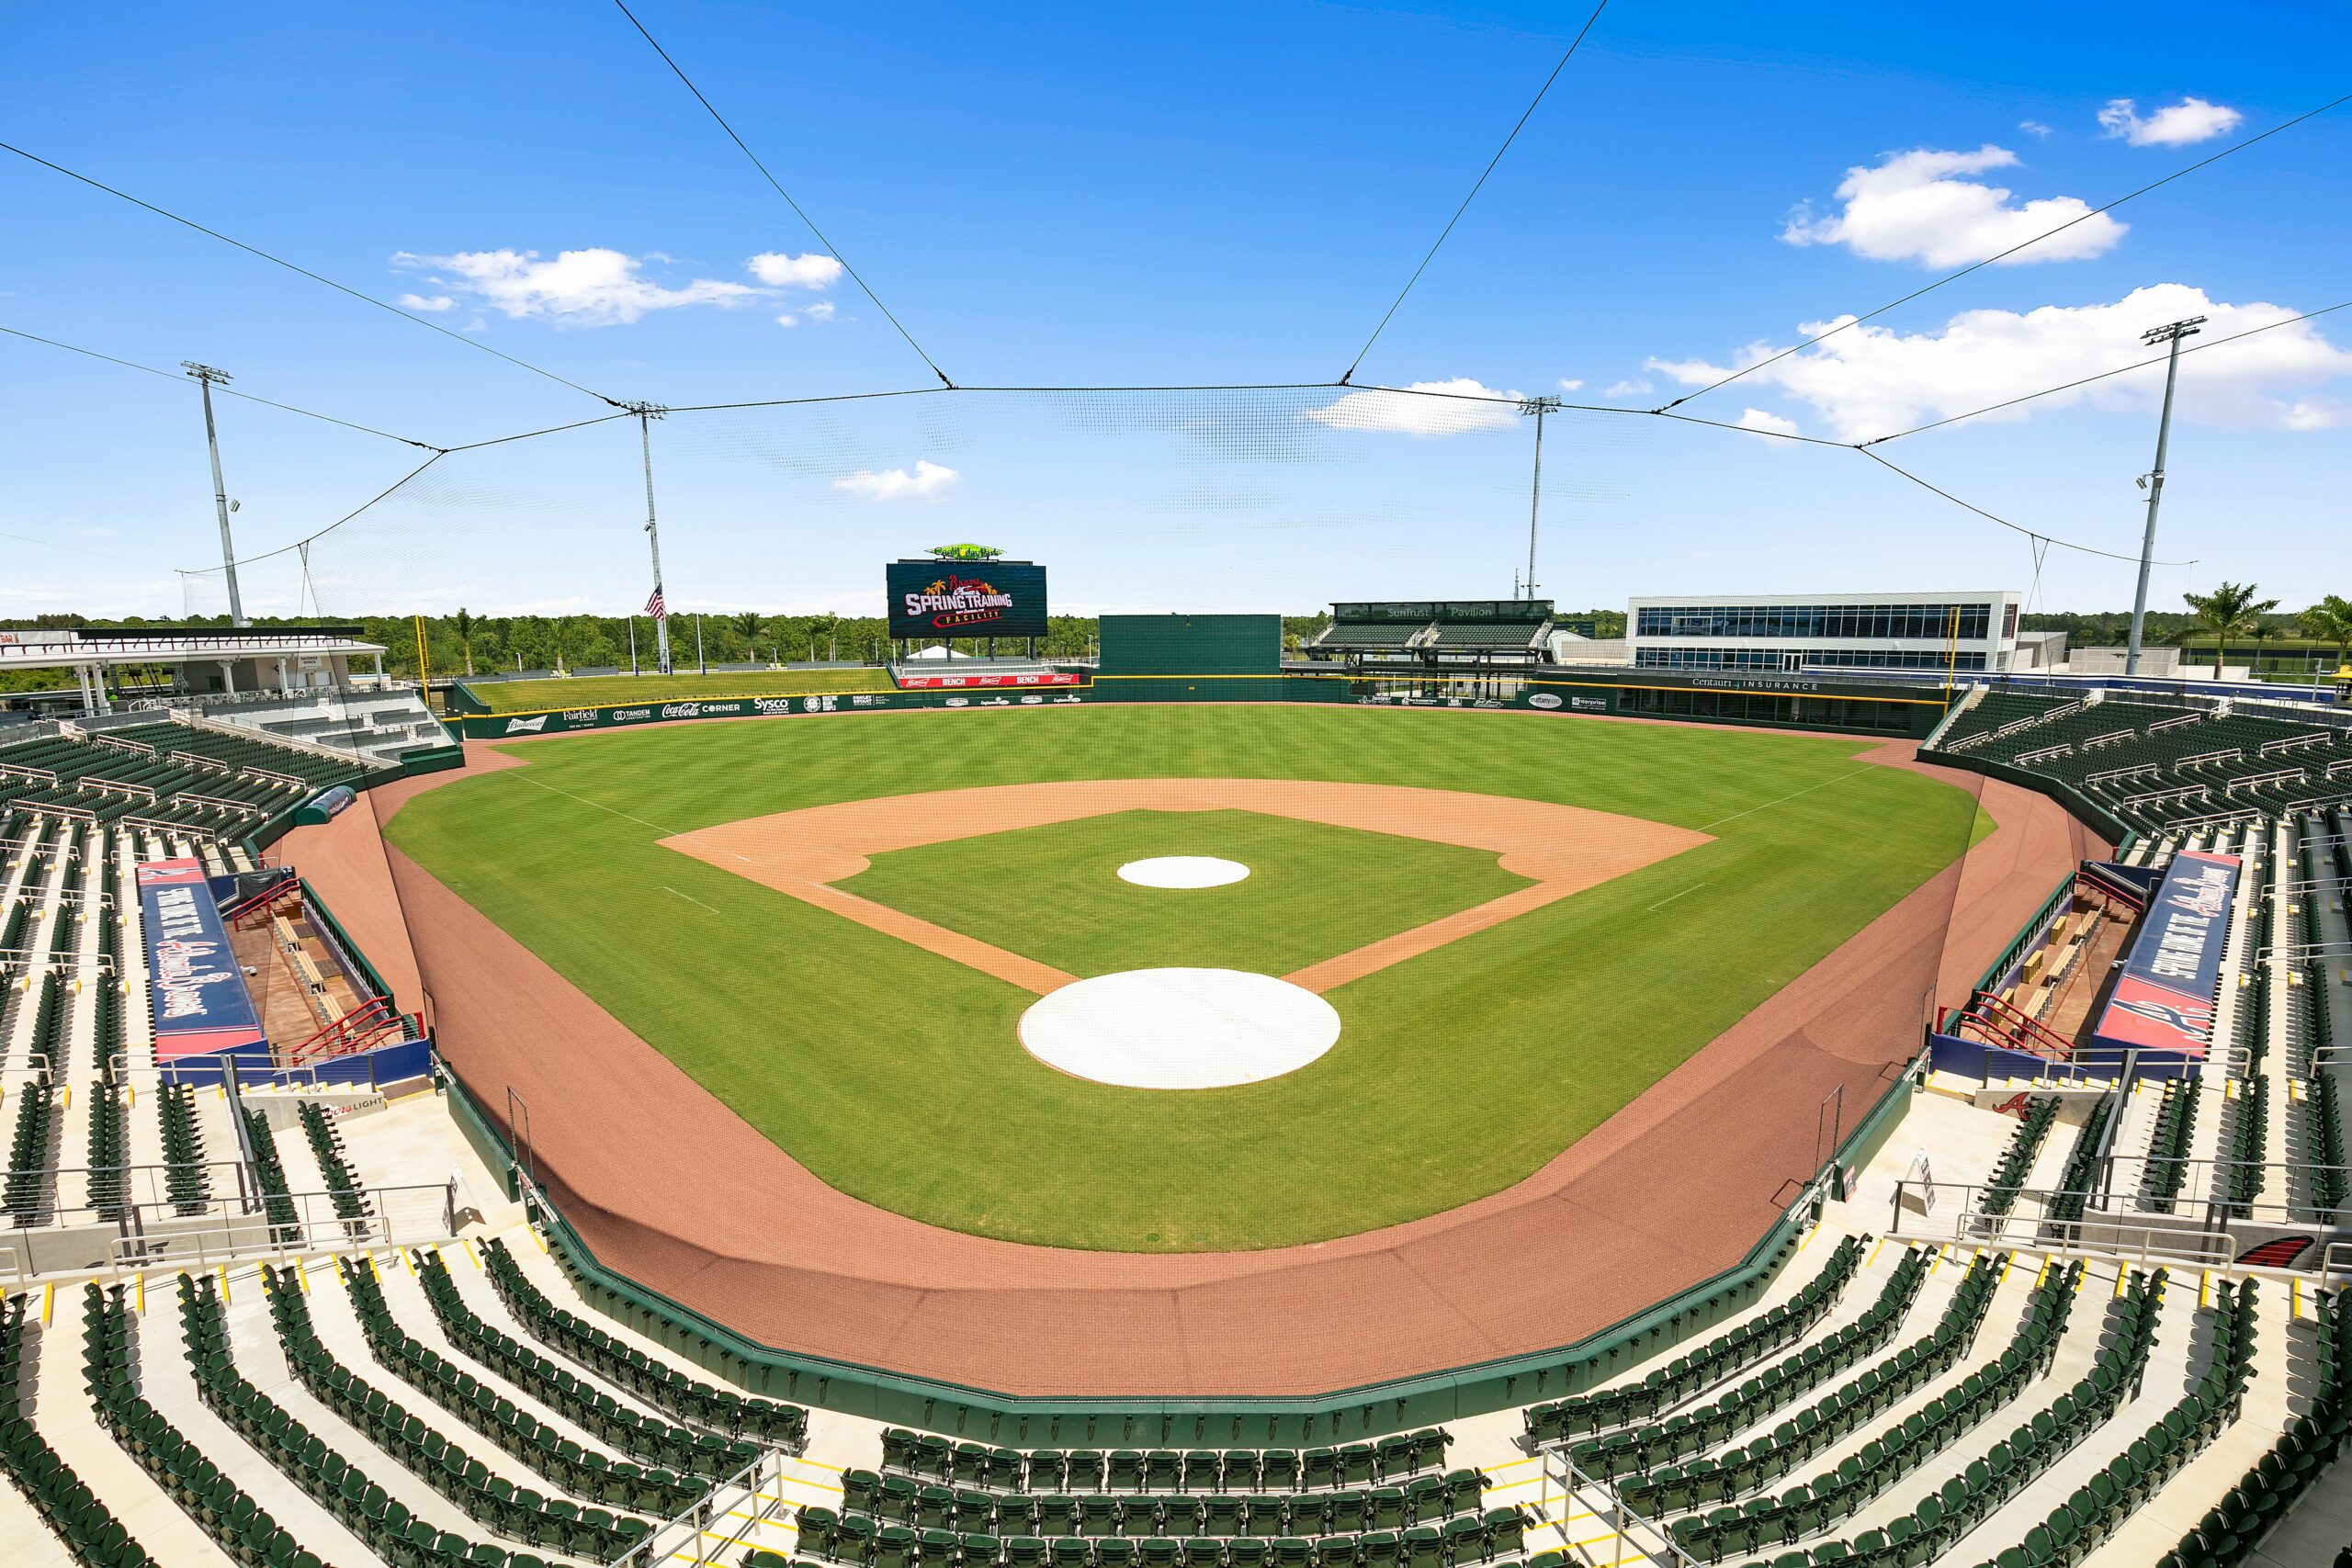 MLB Stadium Tours & Eats Special Edition  Braves Spring Training - CoolToday  Park 